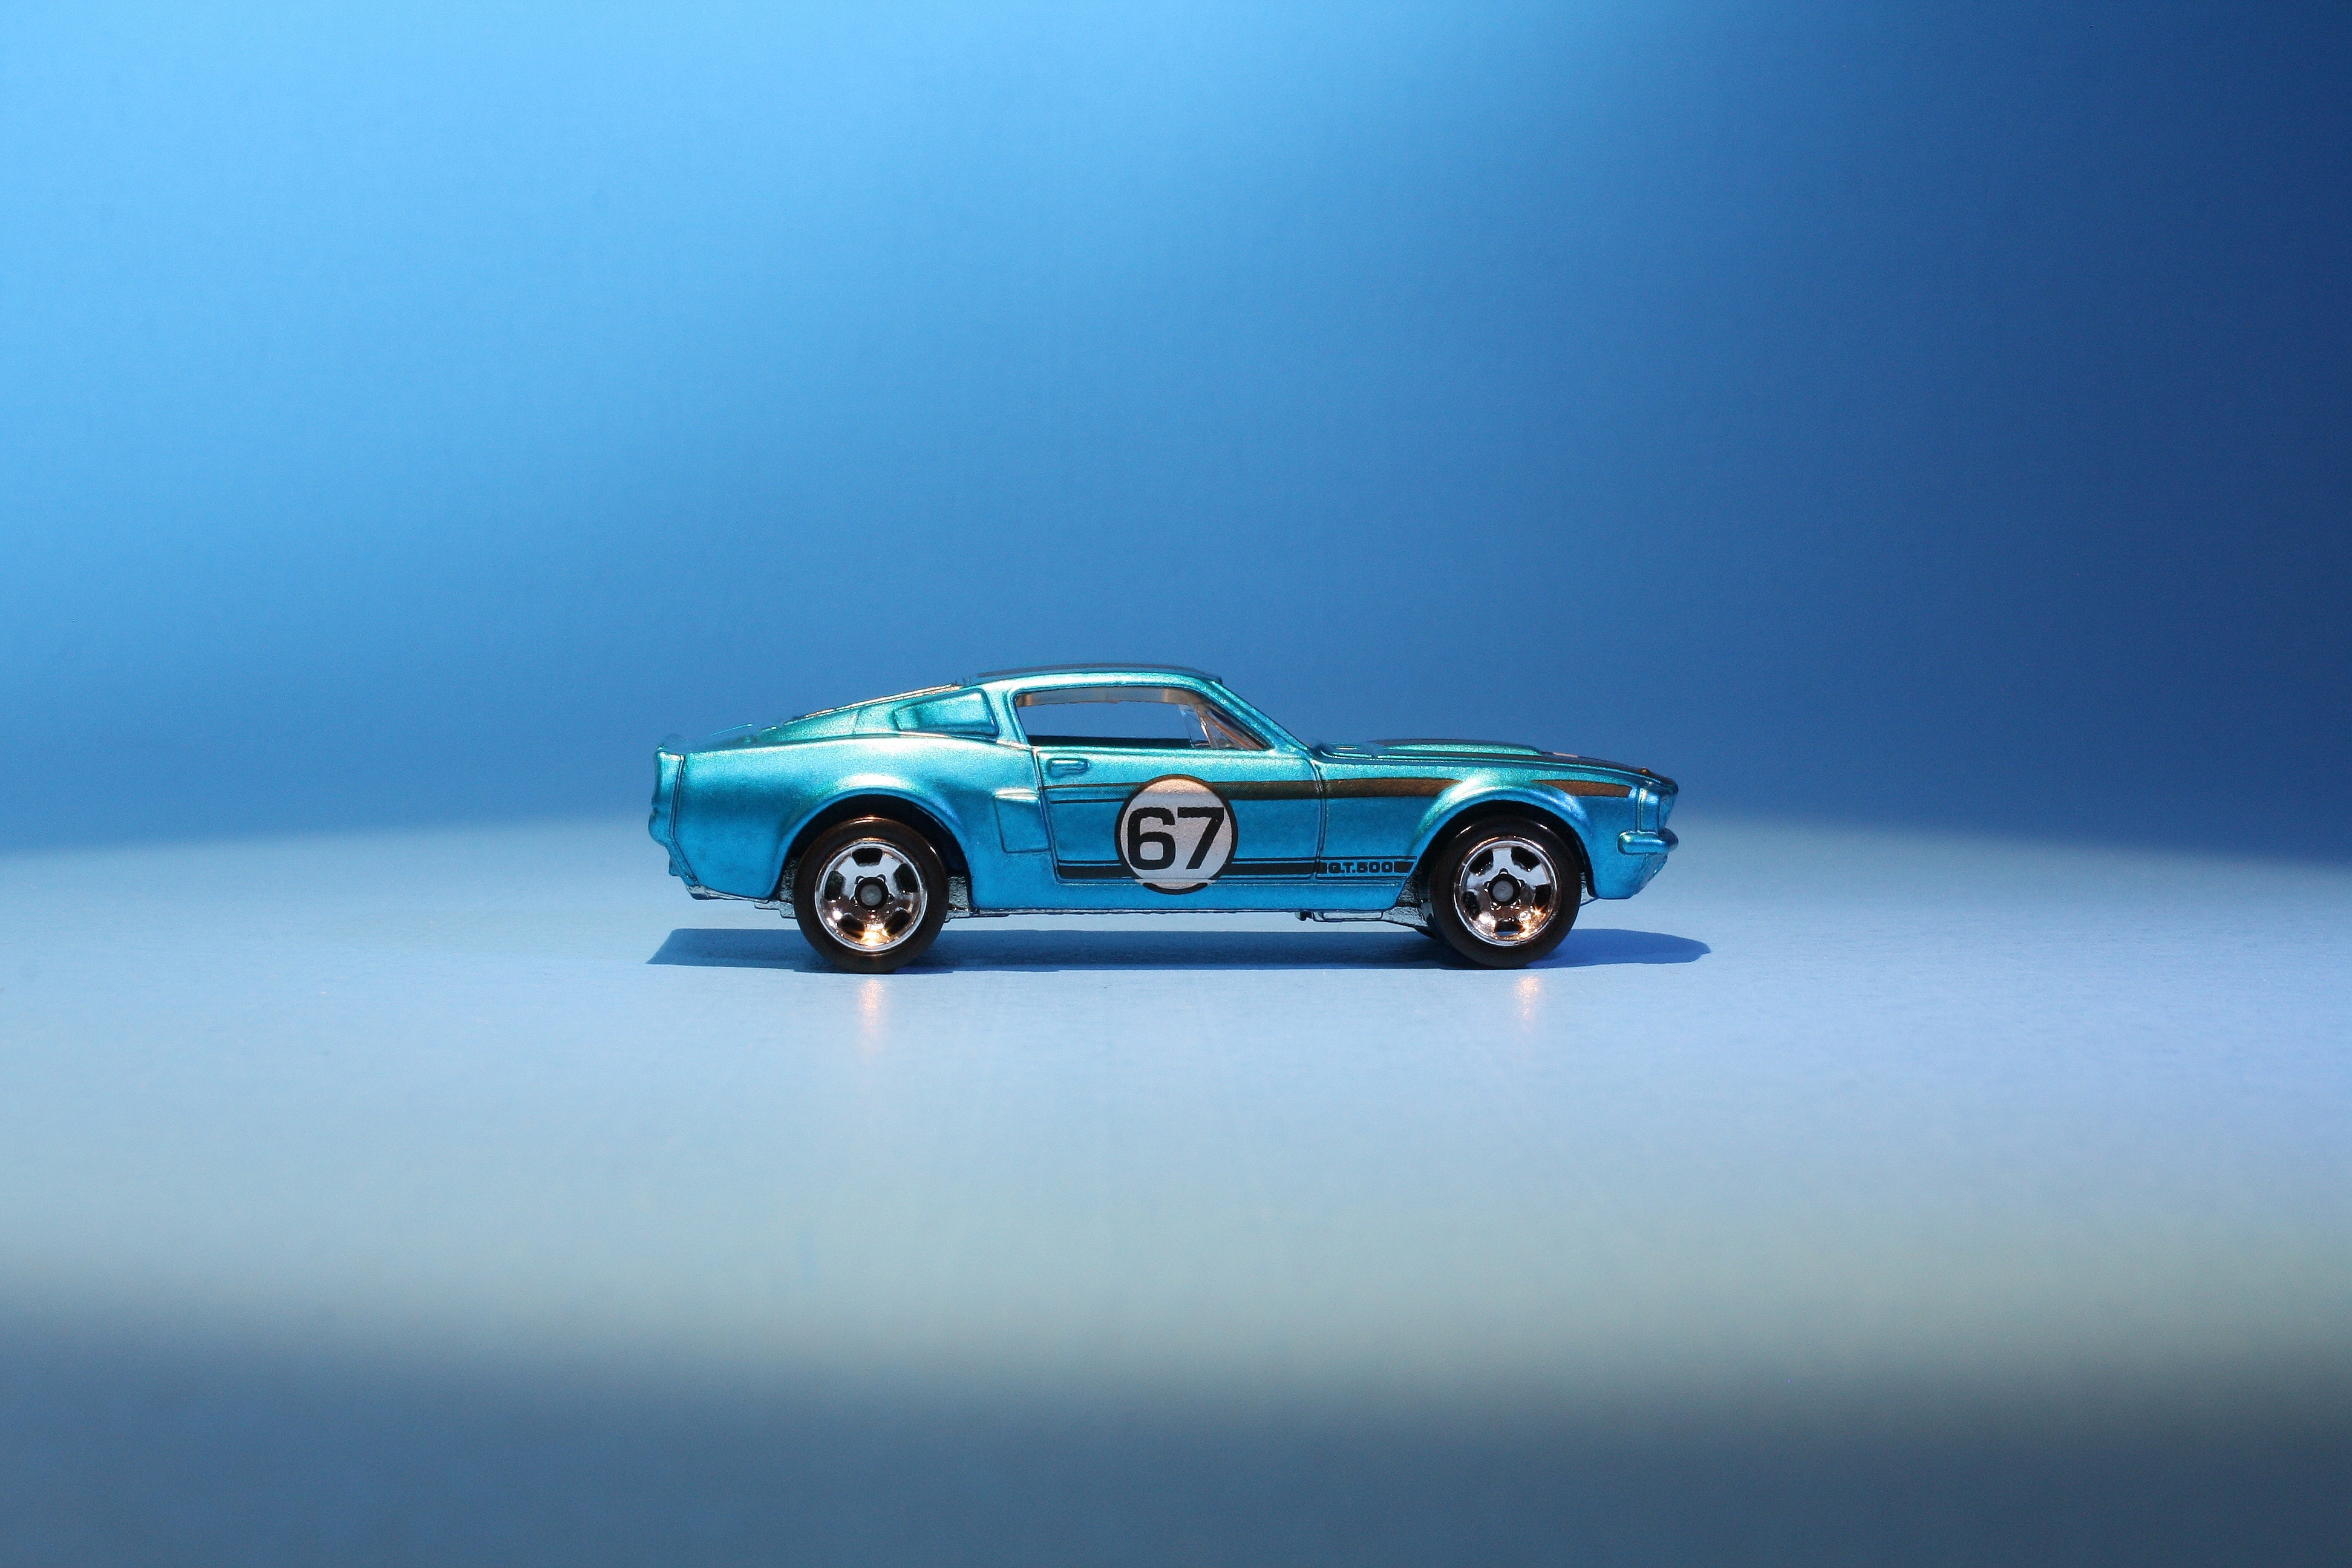 Blue die cast car painted with a number 87 sits in front of a blue backgroun.